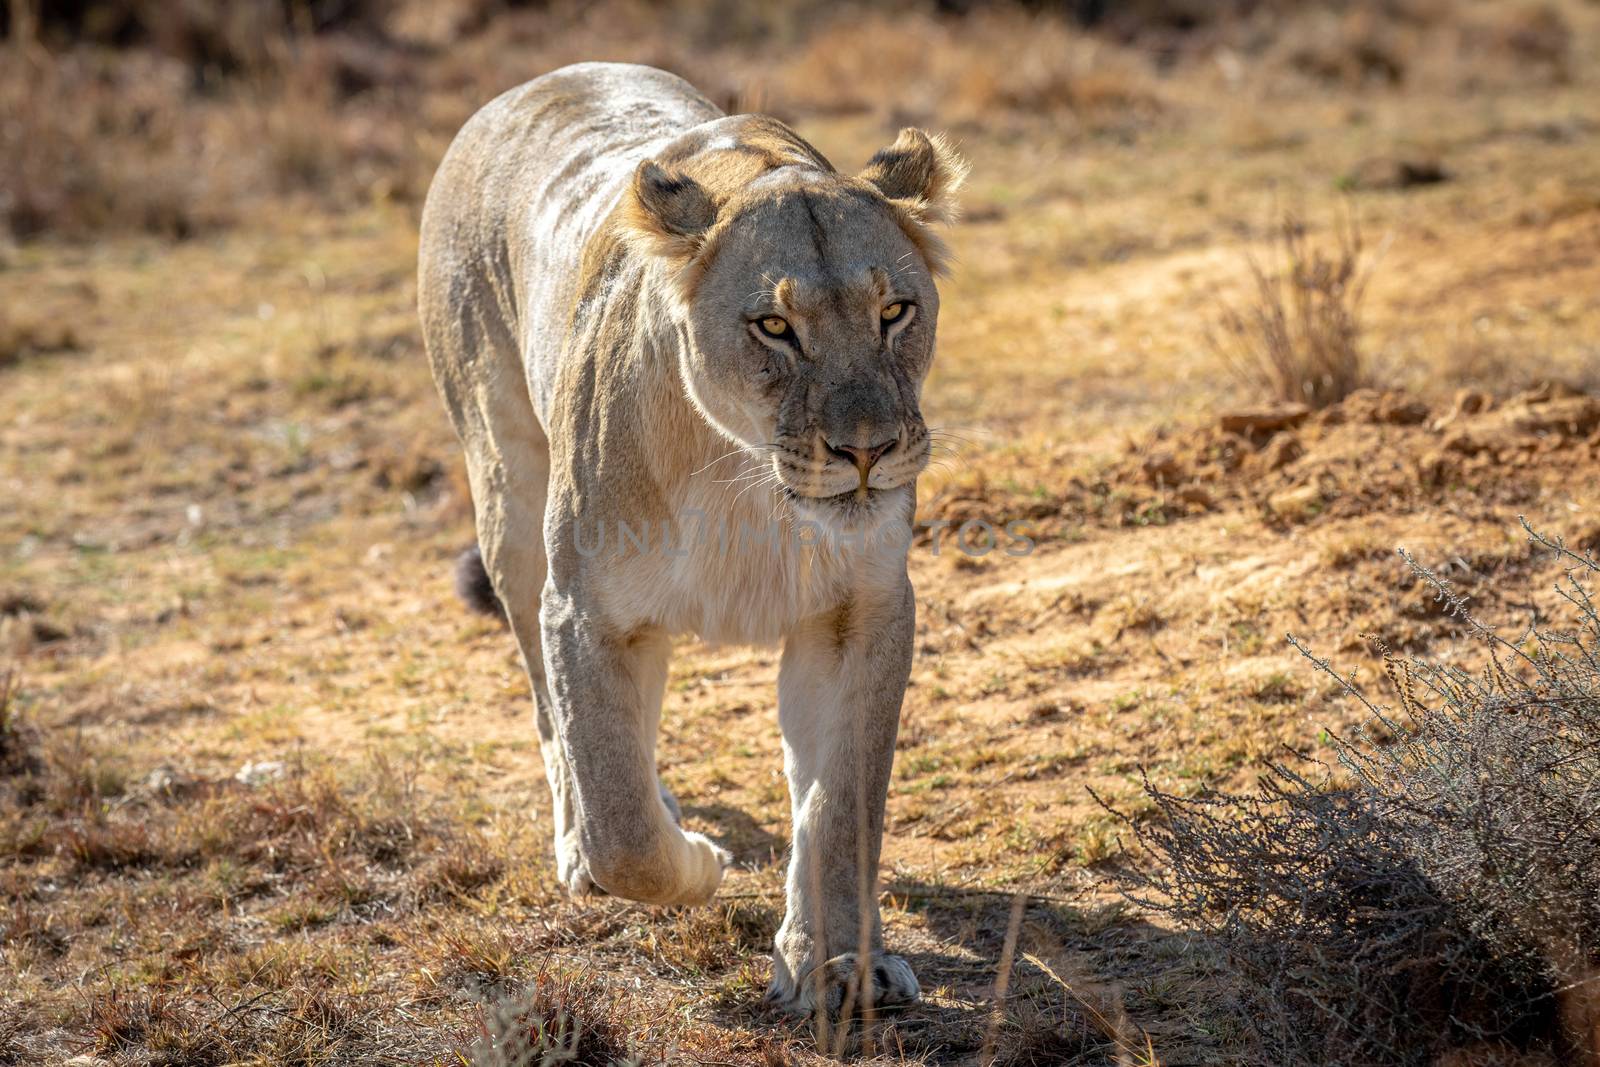 Lioness walking towards the camera. by Simoneemanphotography